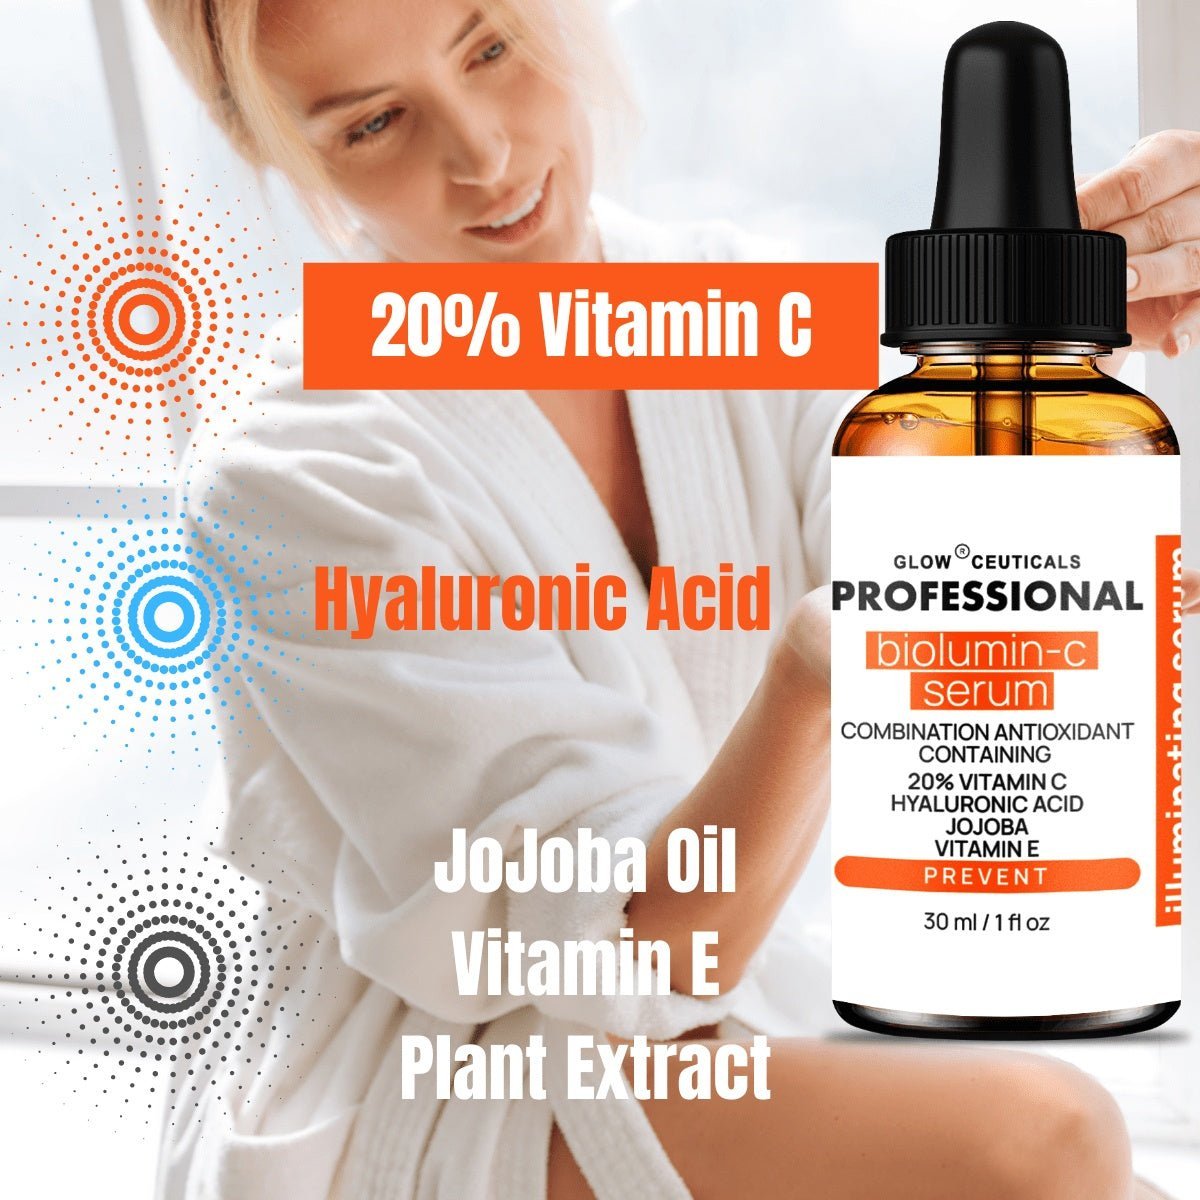 Vitamin C Serum Concentrate 20% - Ultimate Skin Renewal - Potent Anti-Aging Formula for Brighter, Firmer, and Radiant Skin - 30ml